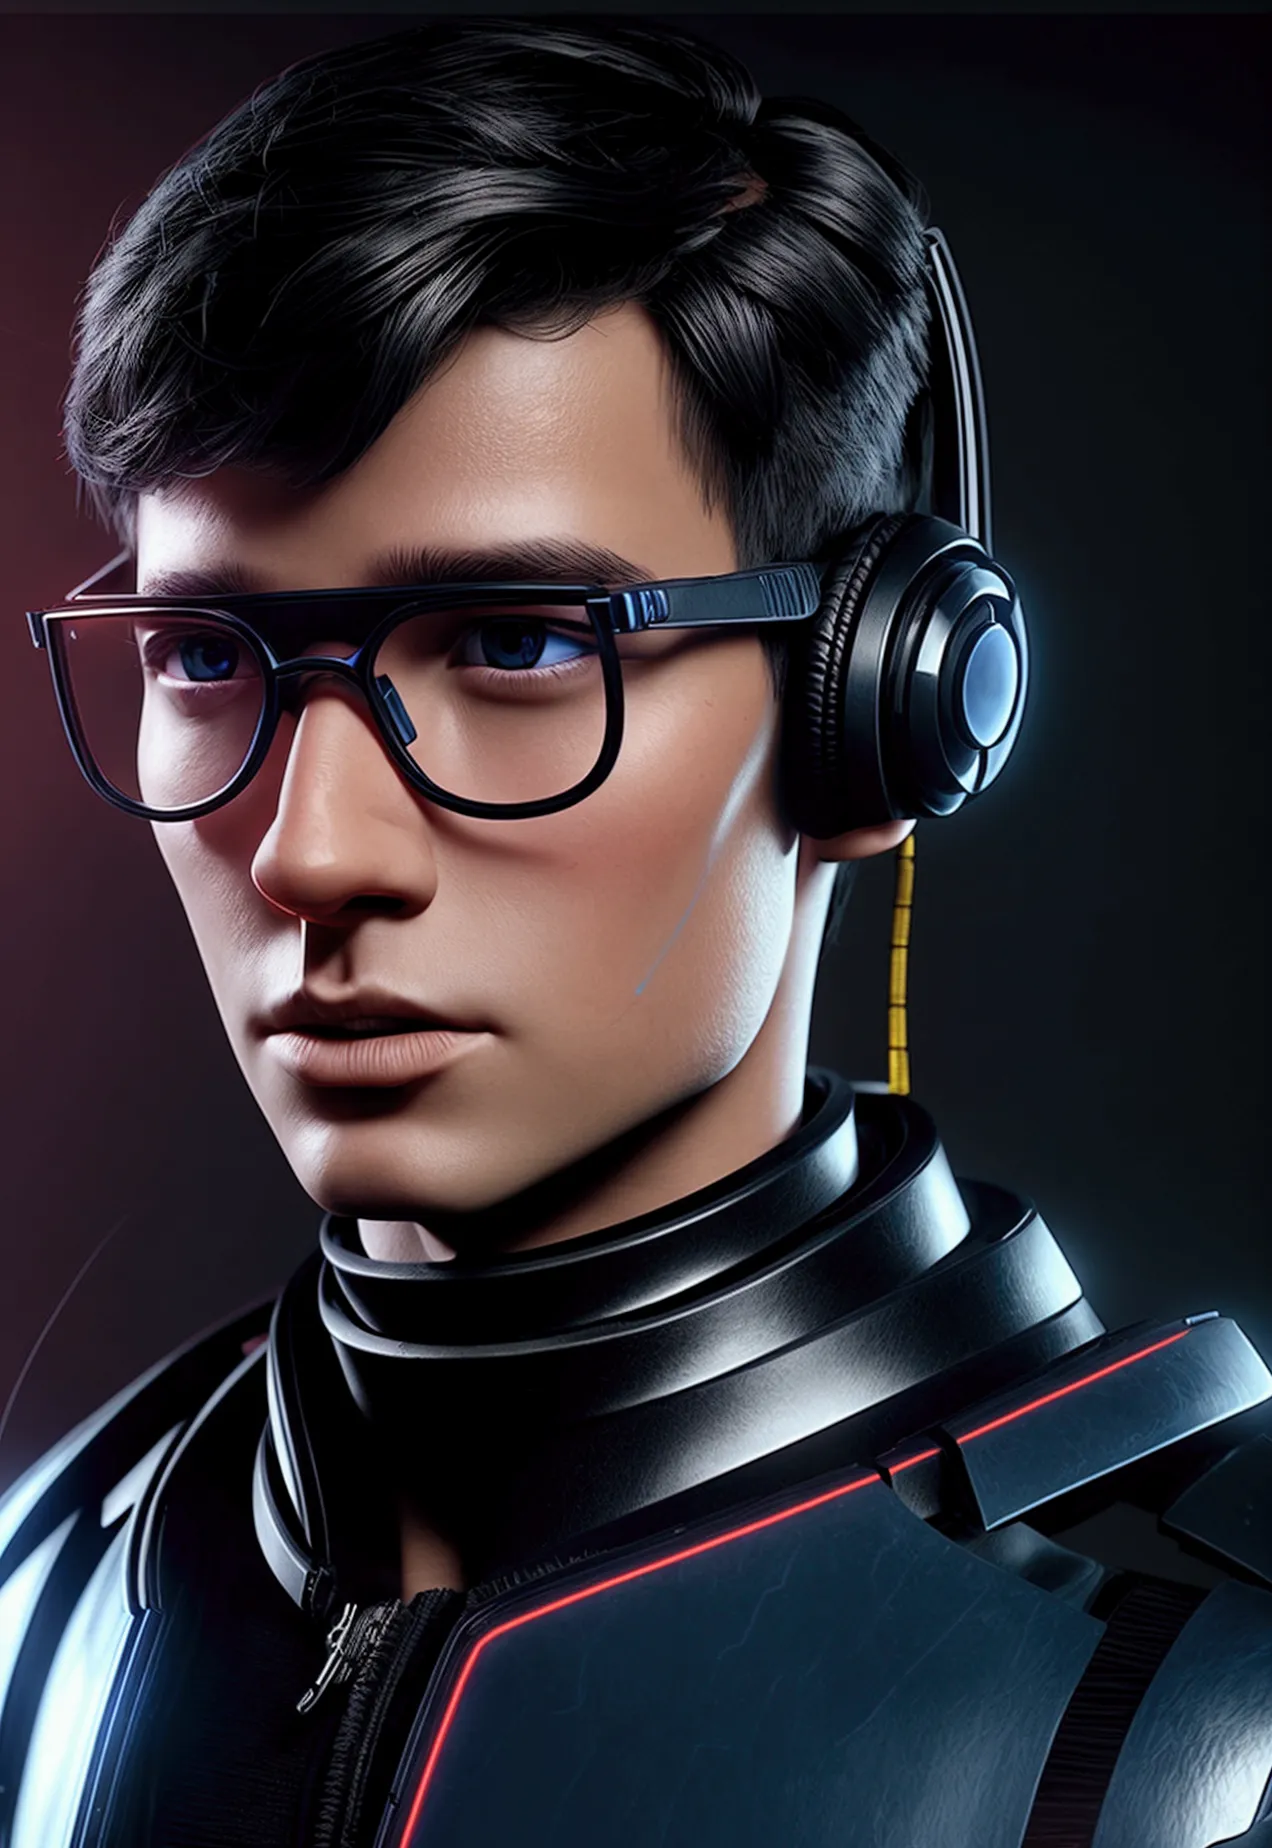 Create an avatar for YouTube that is a boy that resembles Artificial Intelligence, black hair, Eyeglasses, using futuristic neon...